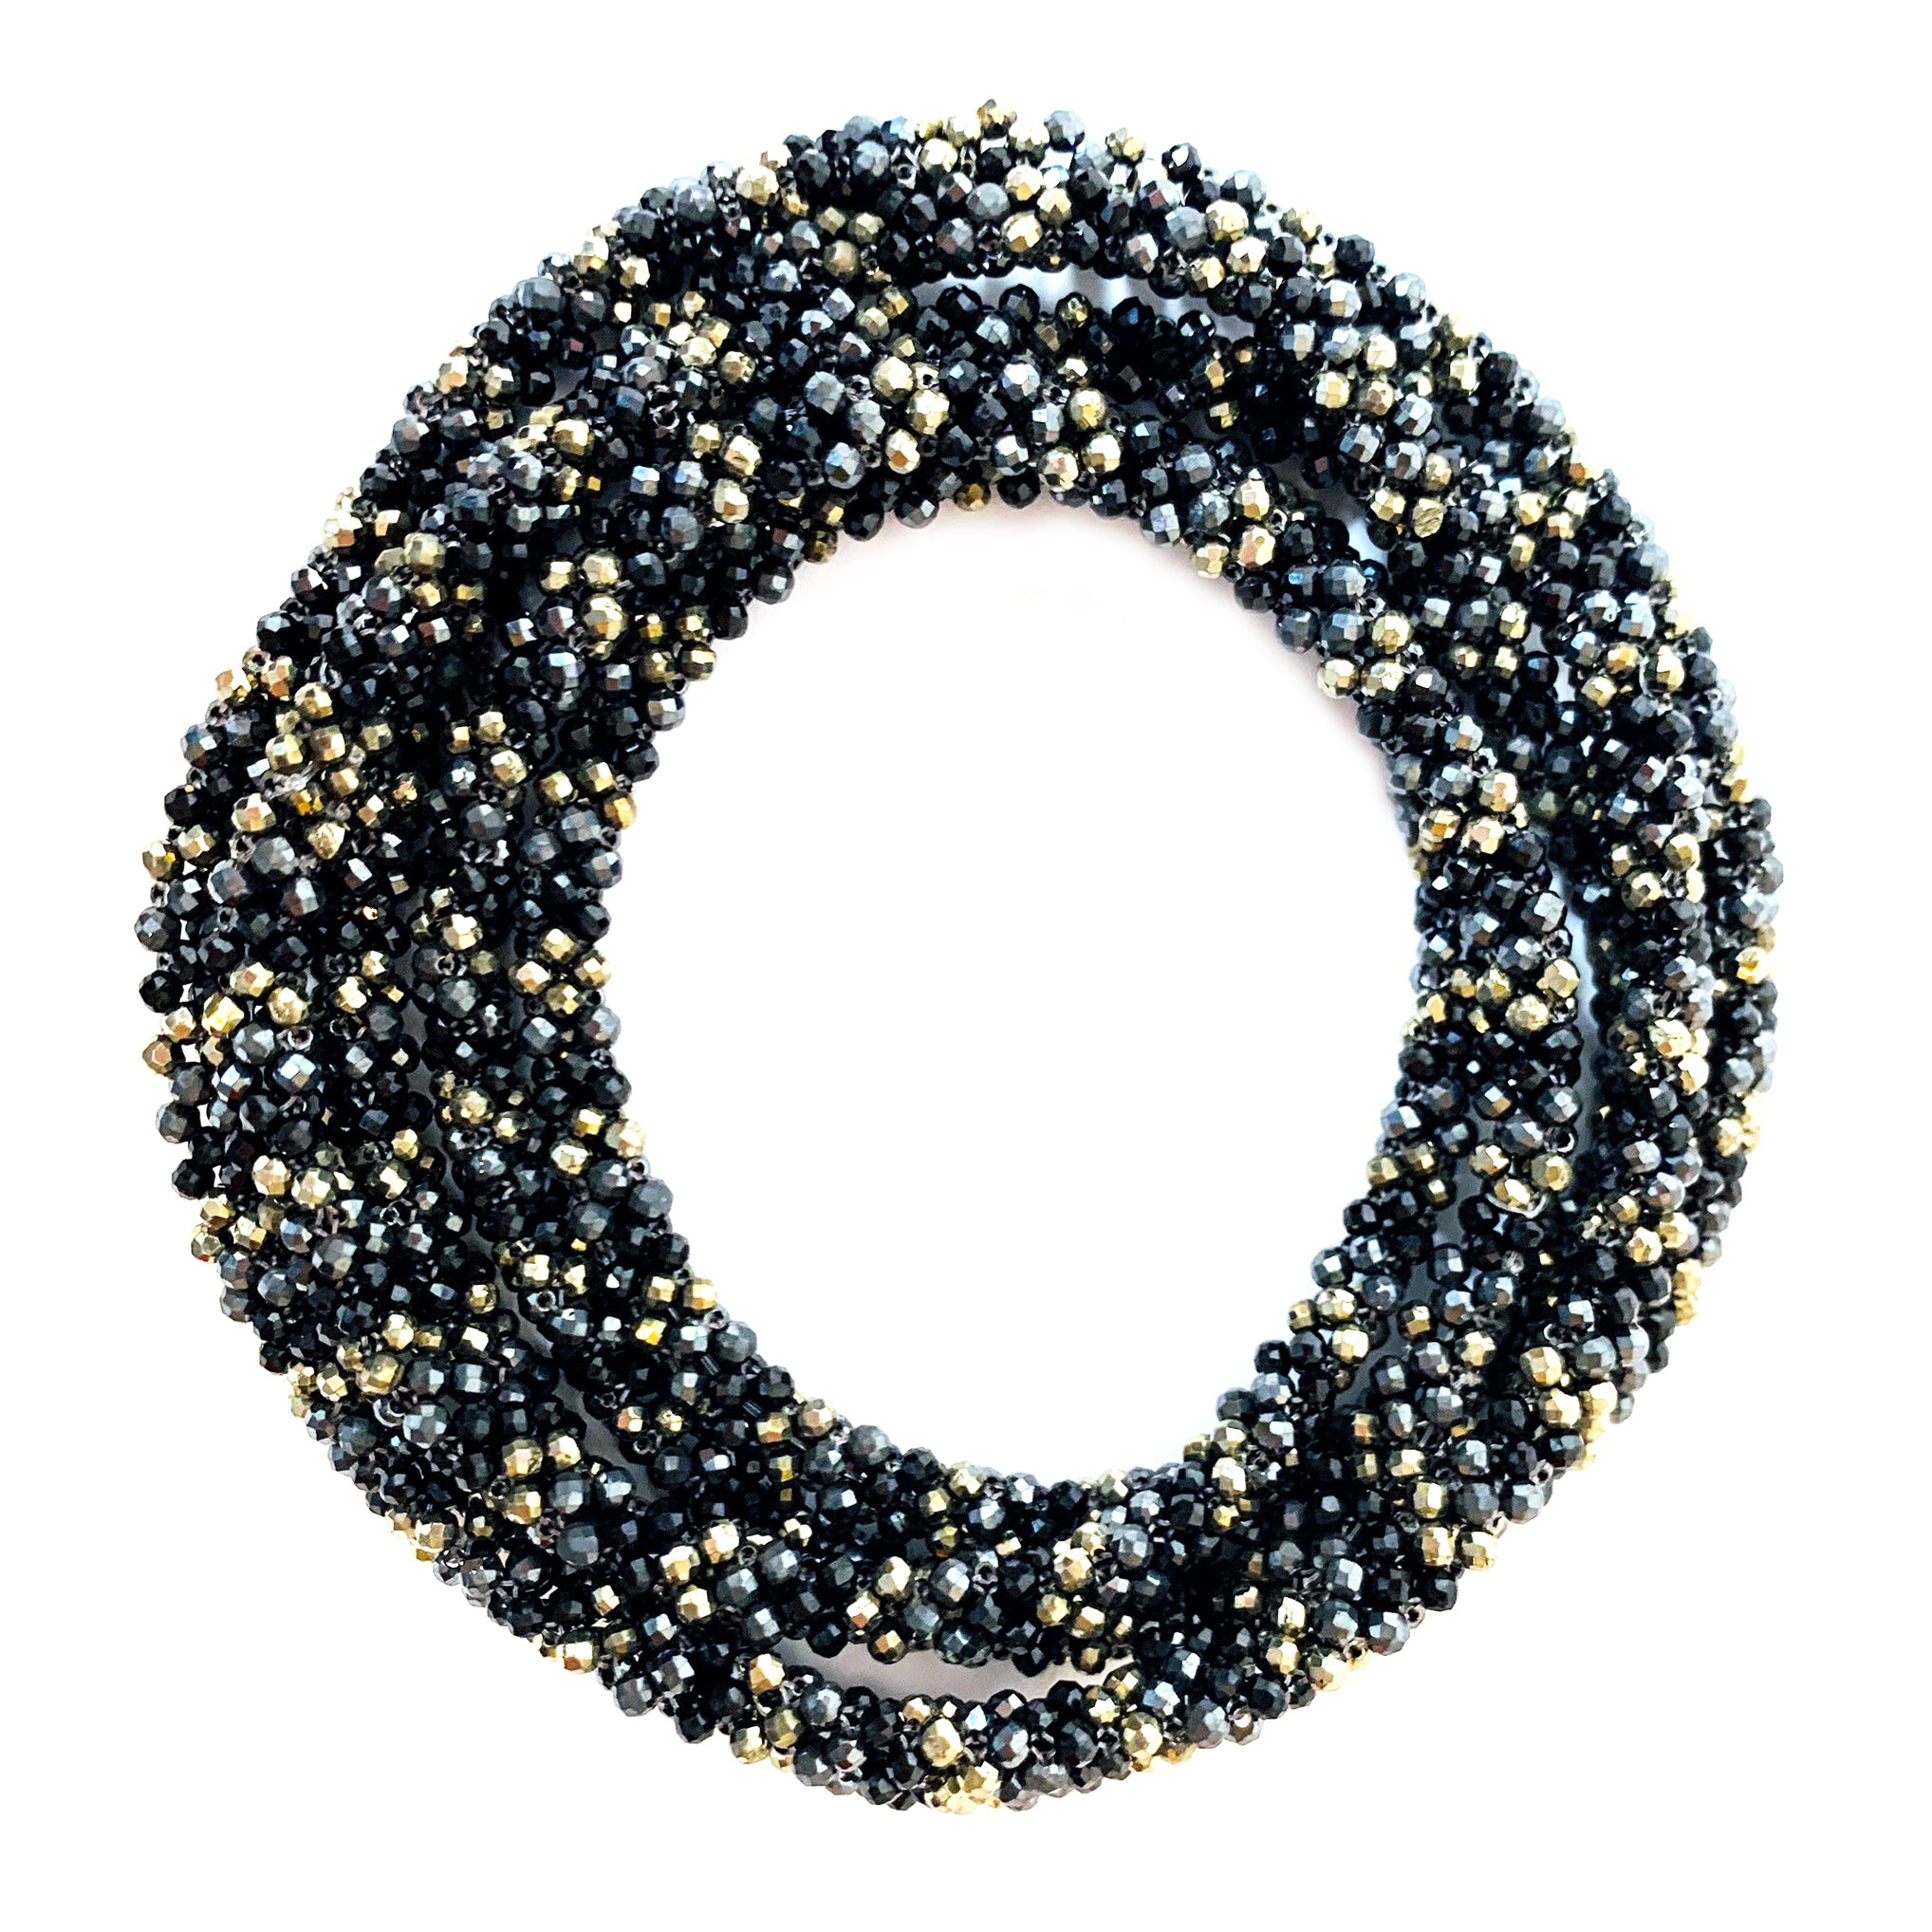 Woven Necklace - Spinel, Hematite and Pyrite